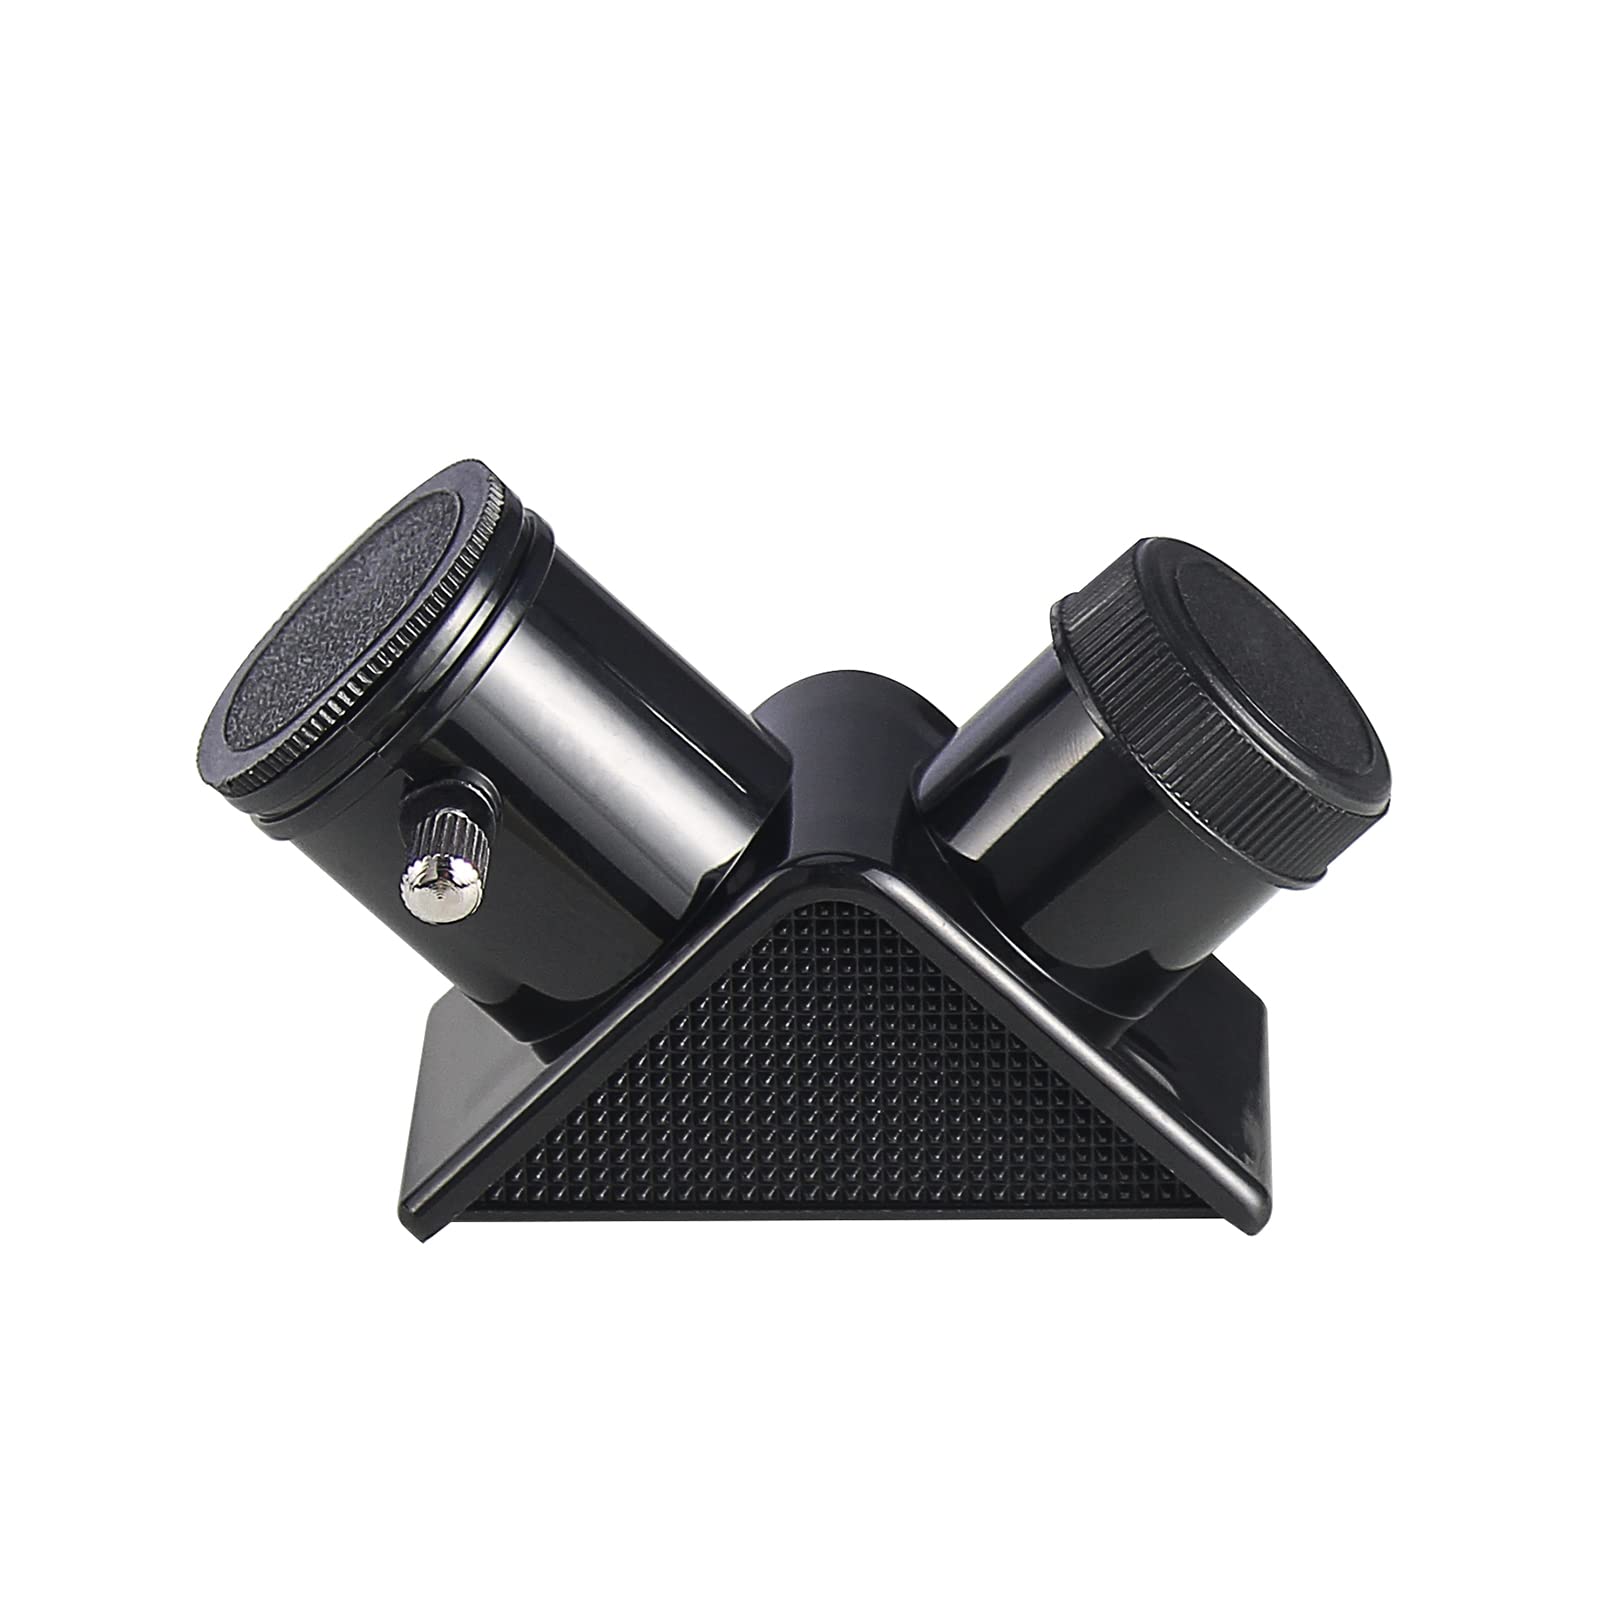 CelticBird 0.965Inch Telescope Accessory Kit for 0.965 Telescope - Comes with Four Eyepieces（ 4mm/6mm/12.5mm/ 20mm ）, one Diagonal, a 3X Barlow Lens